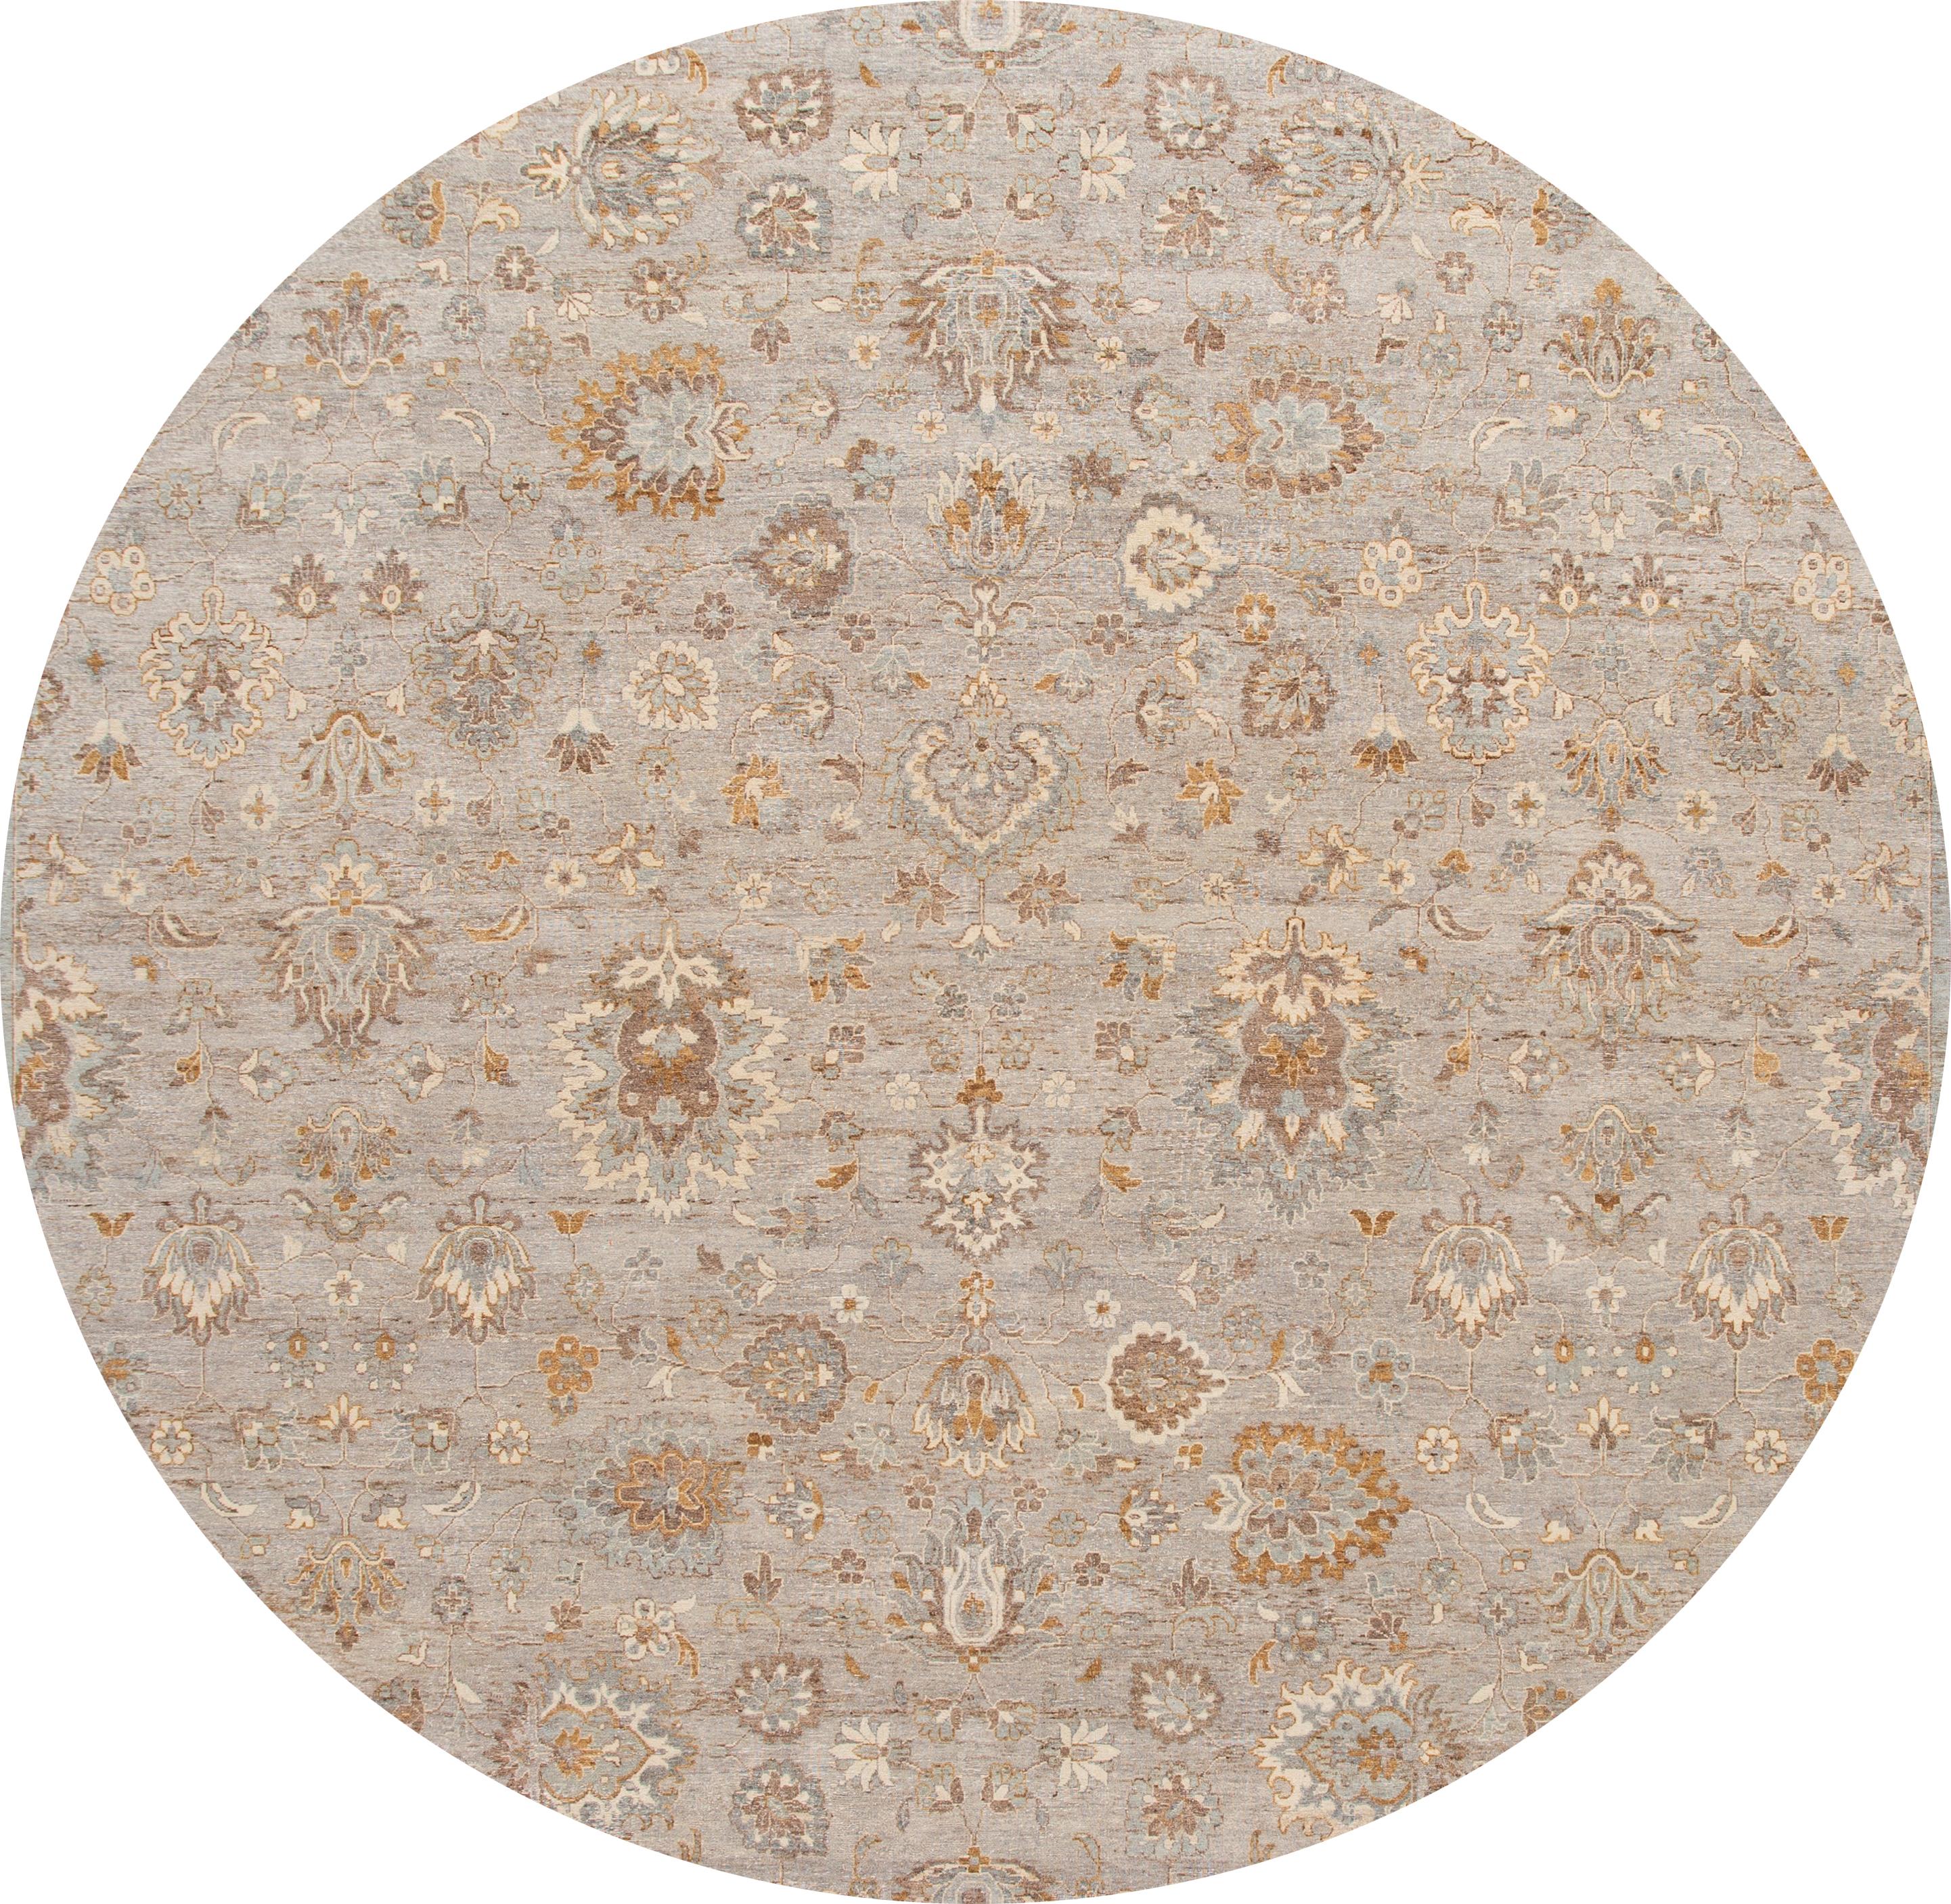 Beautiful hand knotted modern Indian wool rug. This rug has a gray field with tan and brown accents. 

This rug measures: 11'10